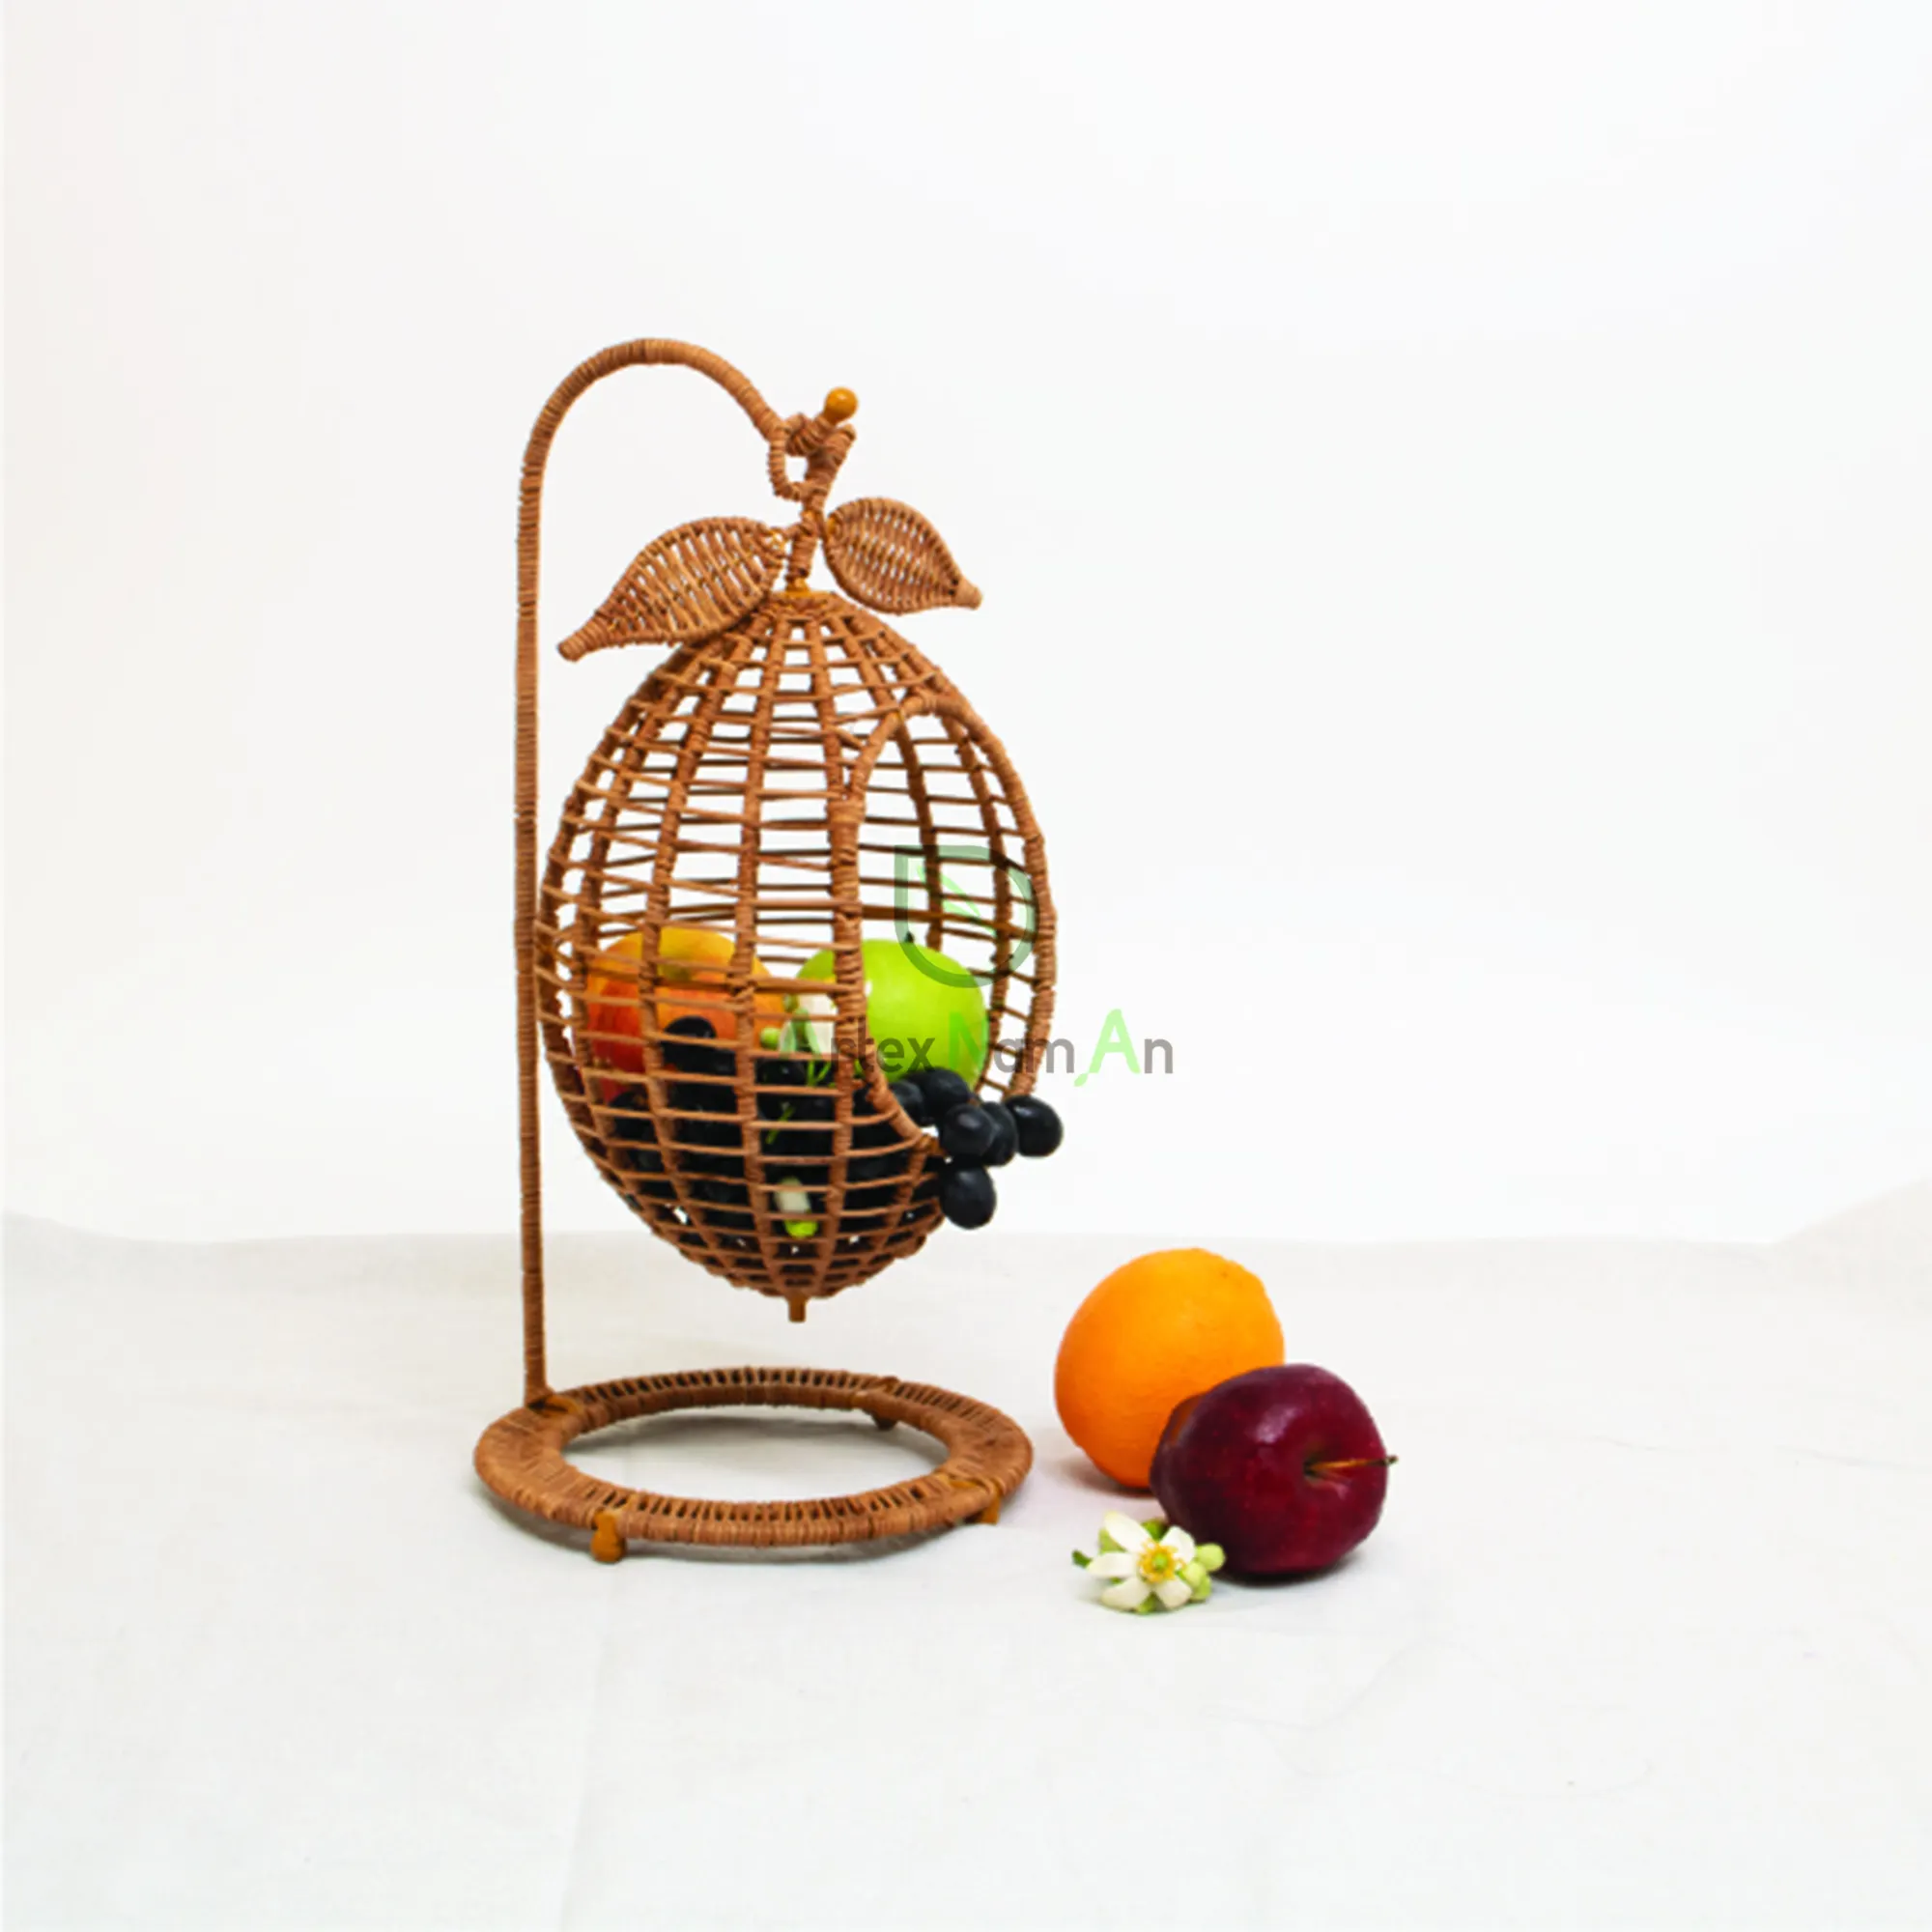 Rattan fruit basket with sturdy metal frame also wicker hanging fruit holder basket for home kitchen decor accessories